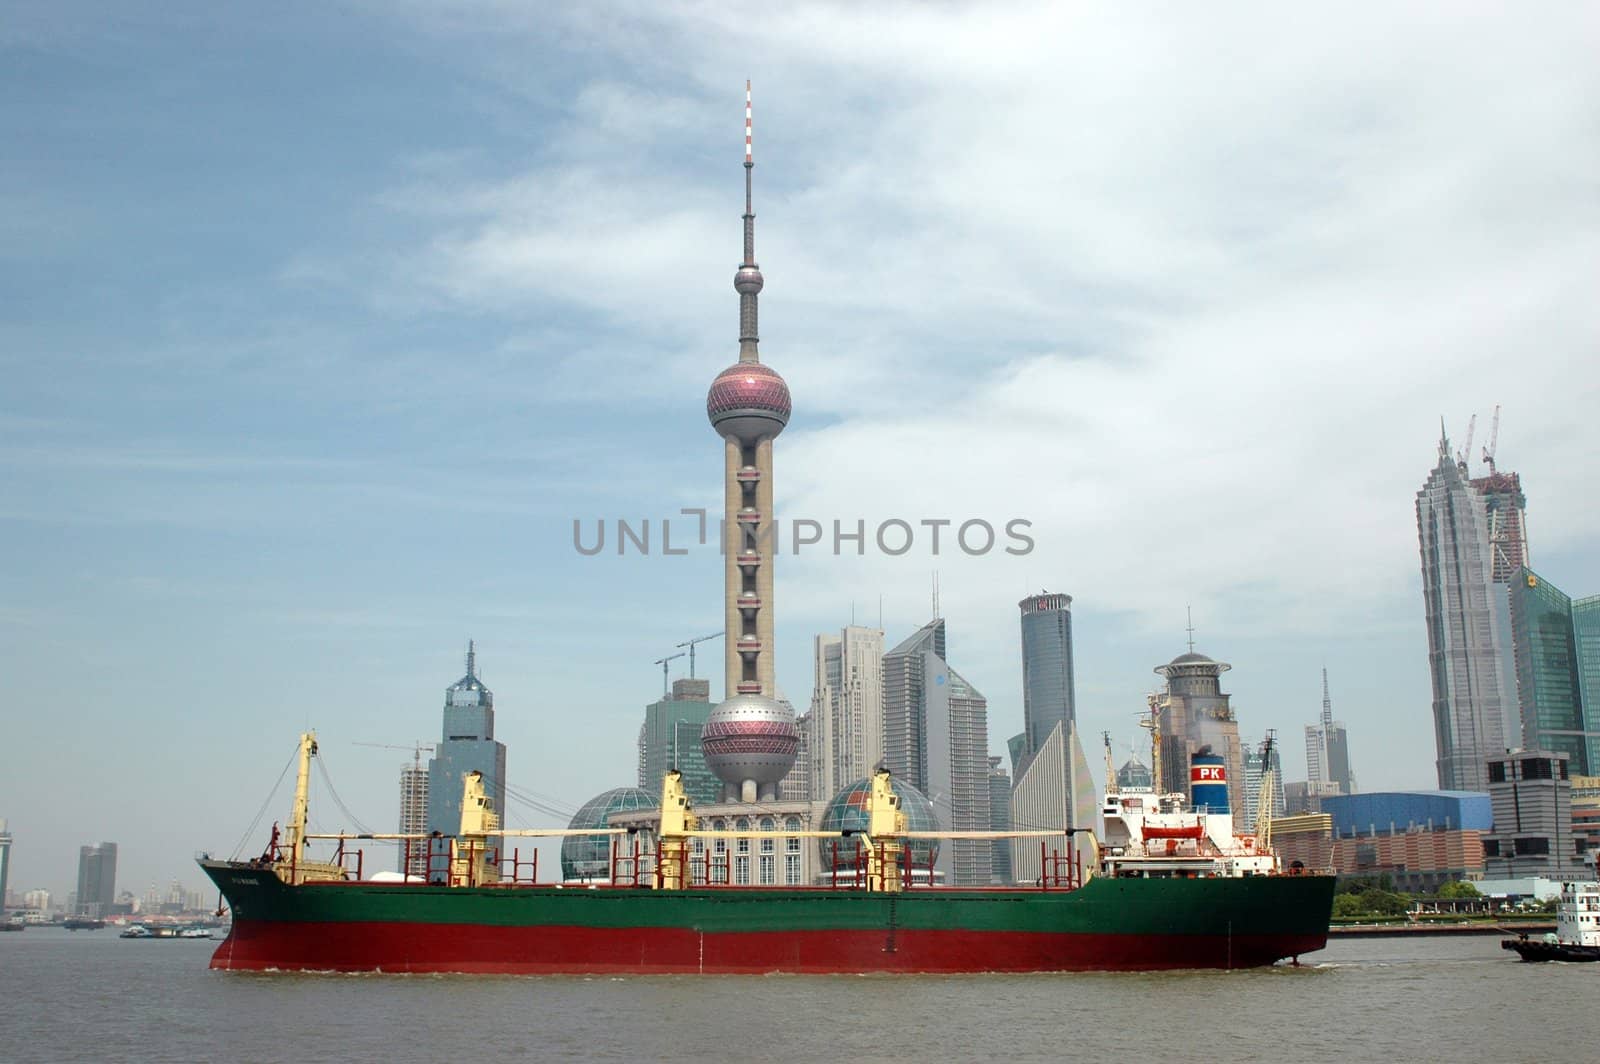 China, Shanghai - general city view, Orient Pearl TV tower, moderns skyscrapers and vessel.